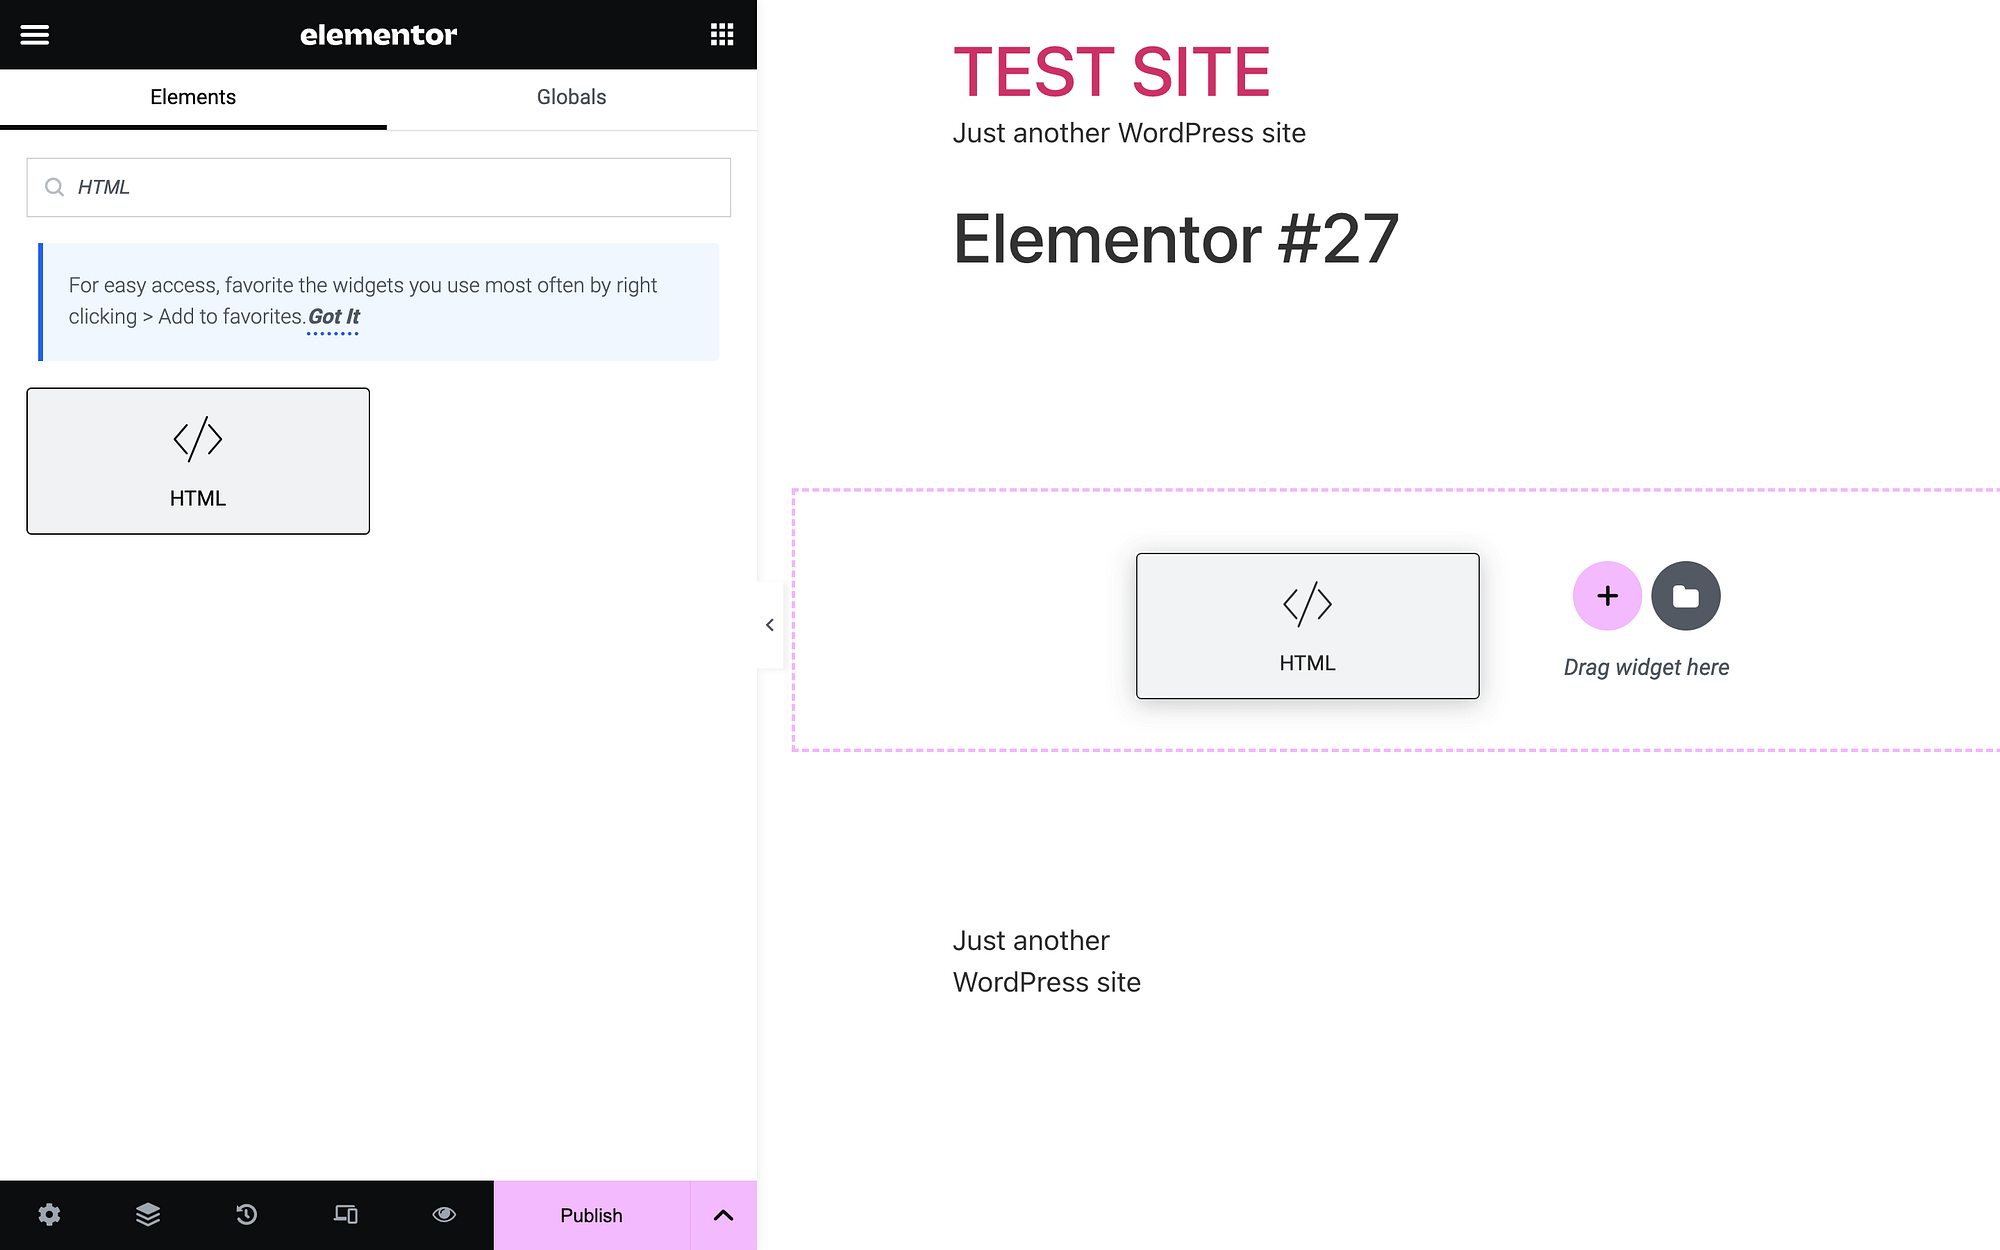 Adding an HTML widget to an Elementor page.